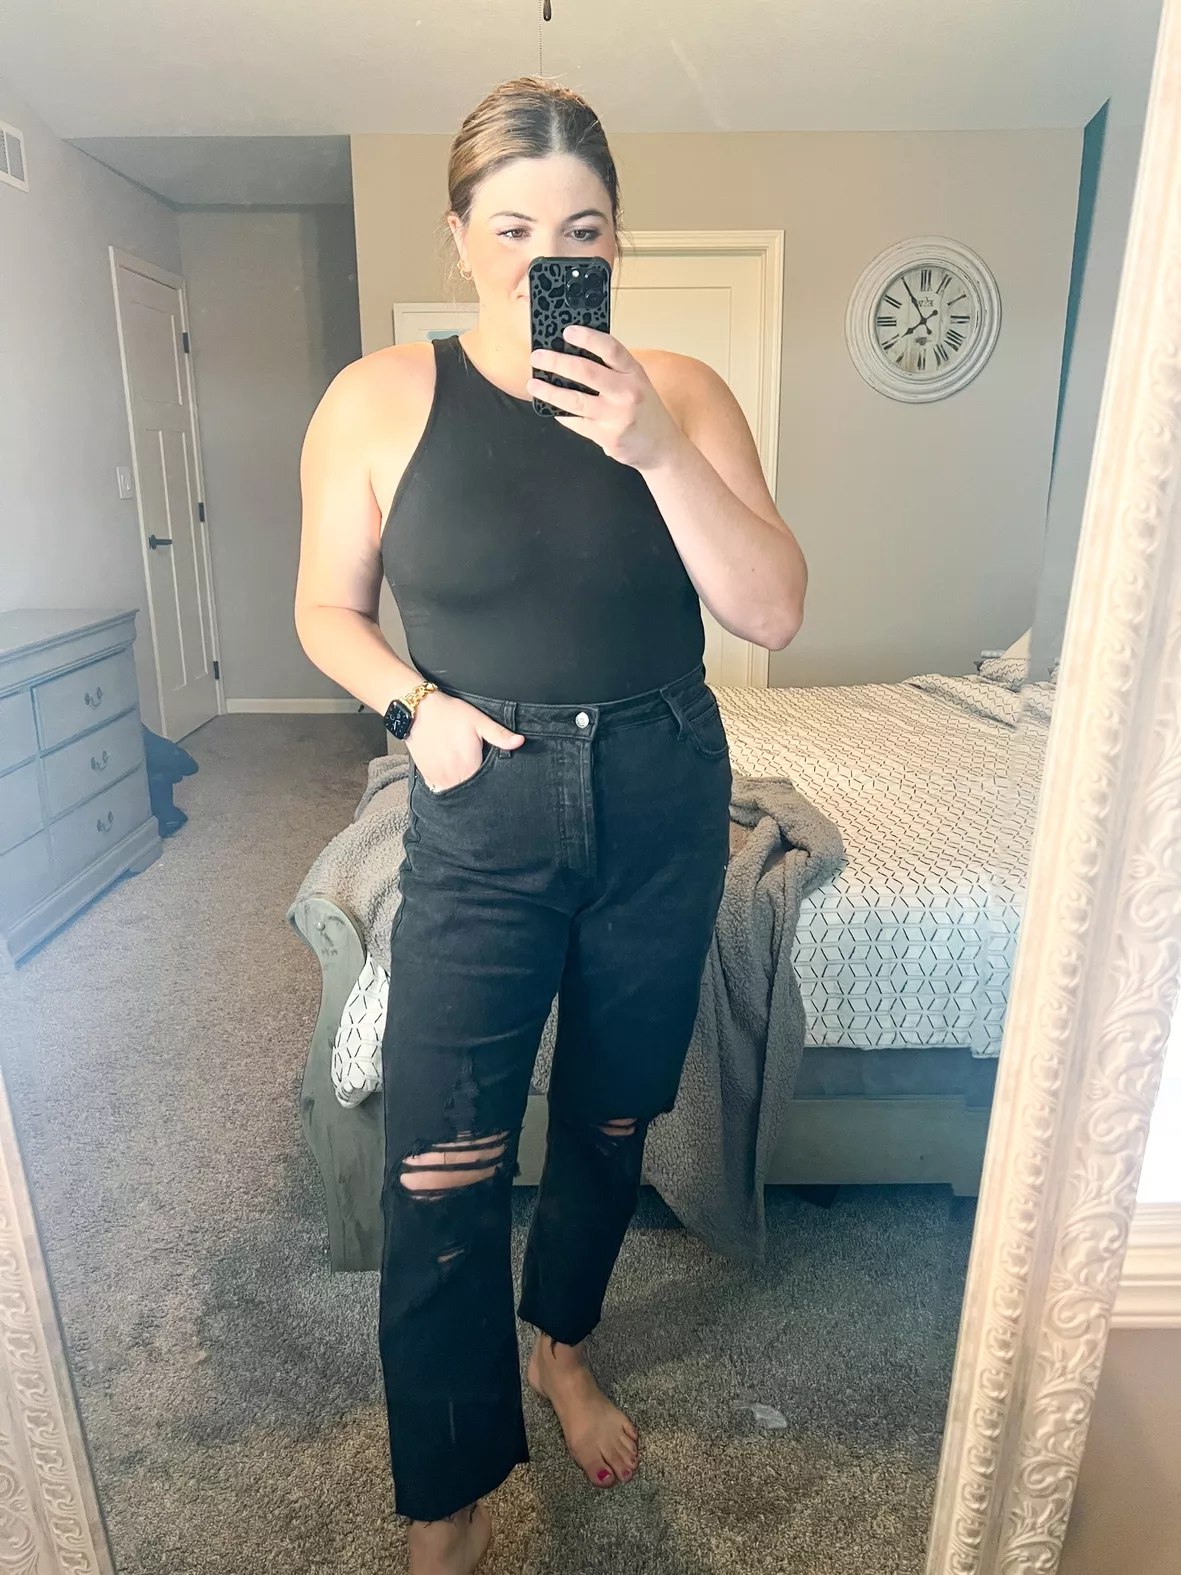 Luxe Leggings: High-Waisted Liquid Leggings, It's Official: Target's Wild  Fable Line is Packed With Trendy, Affordable Finds